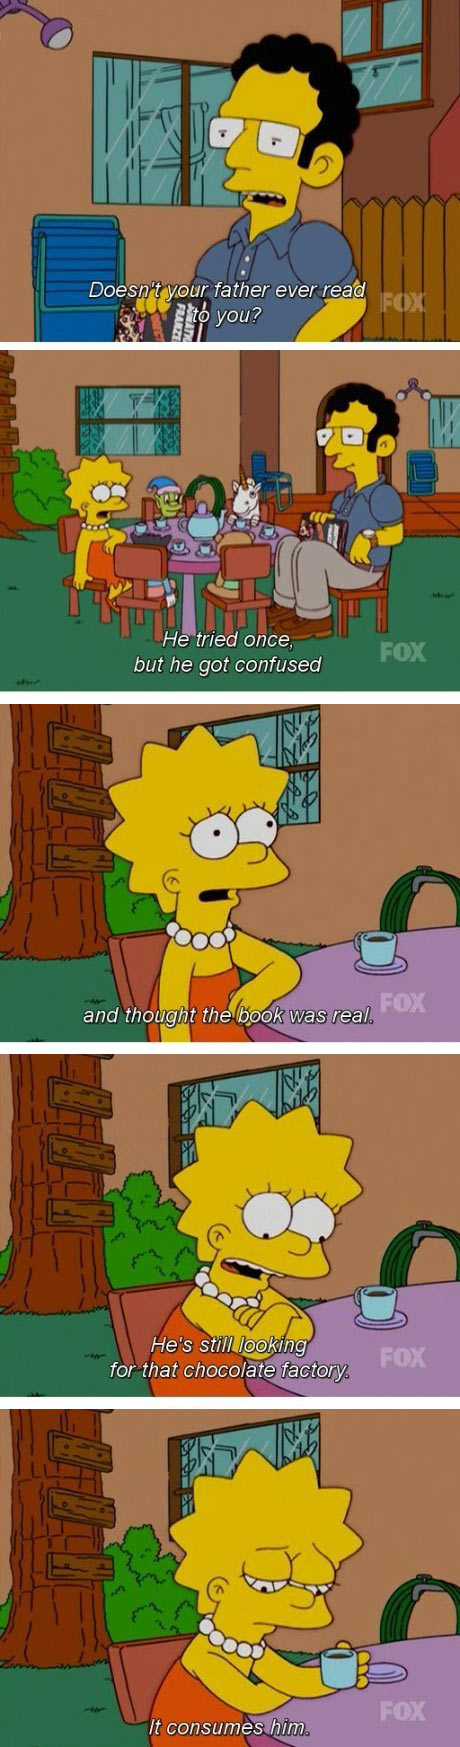 My favorite Simpsons quote…